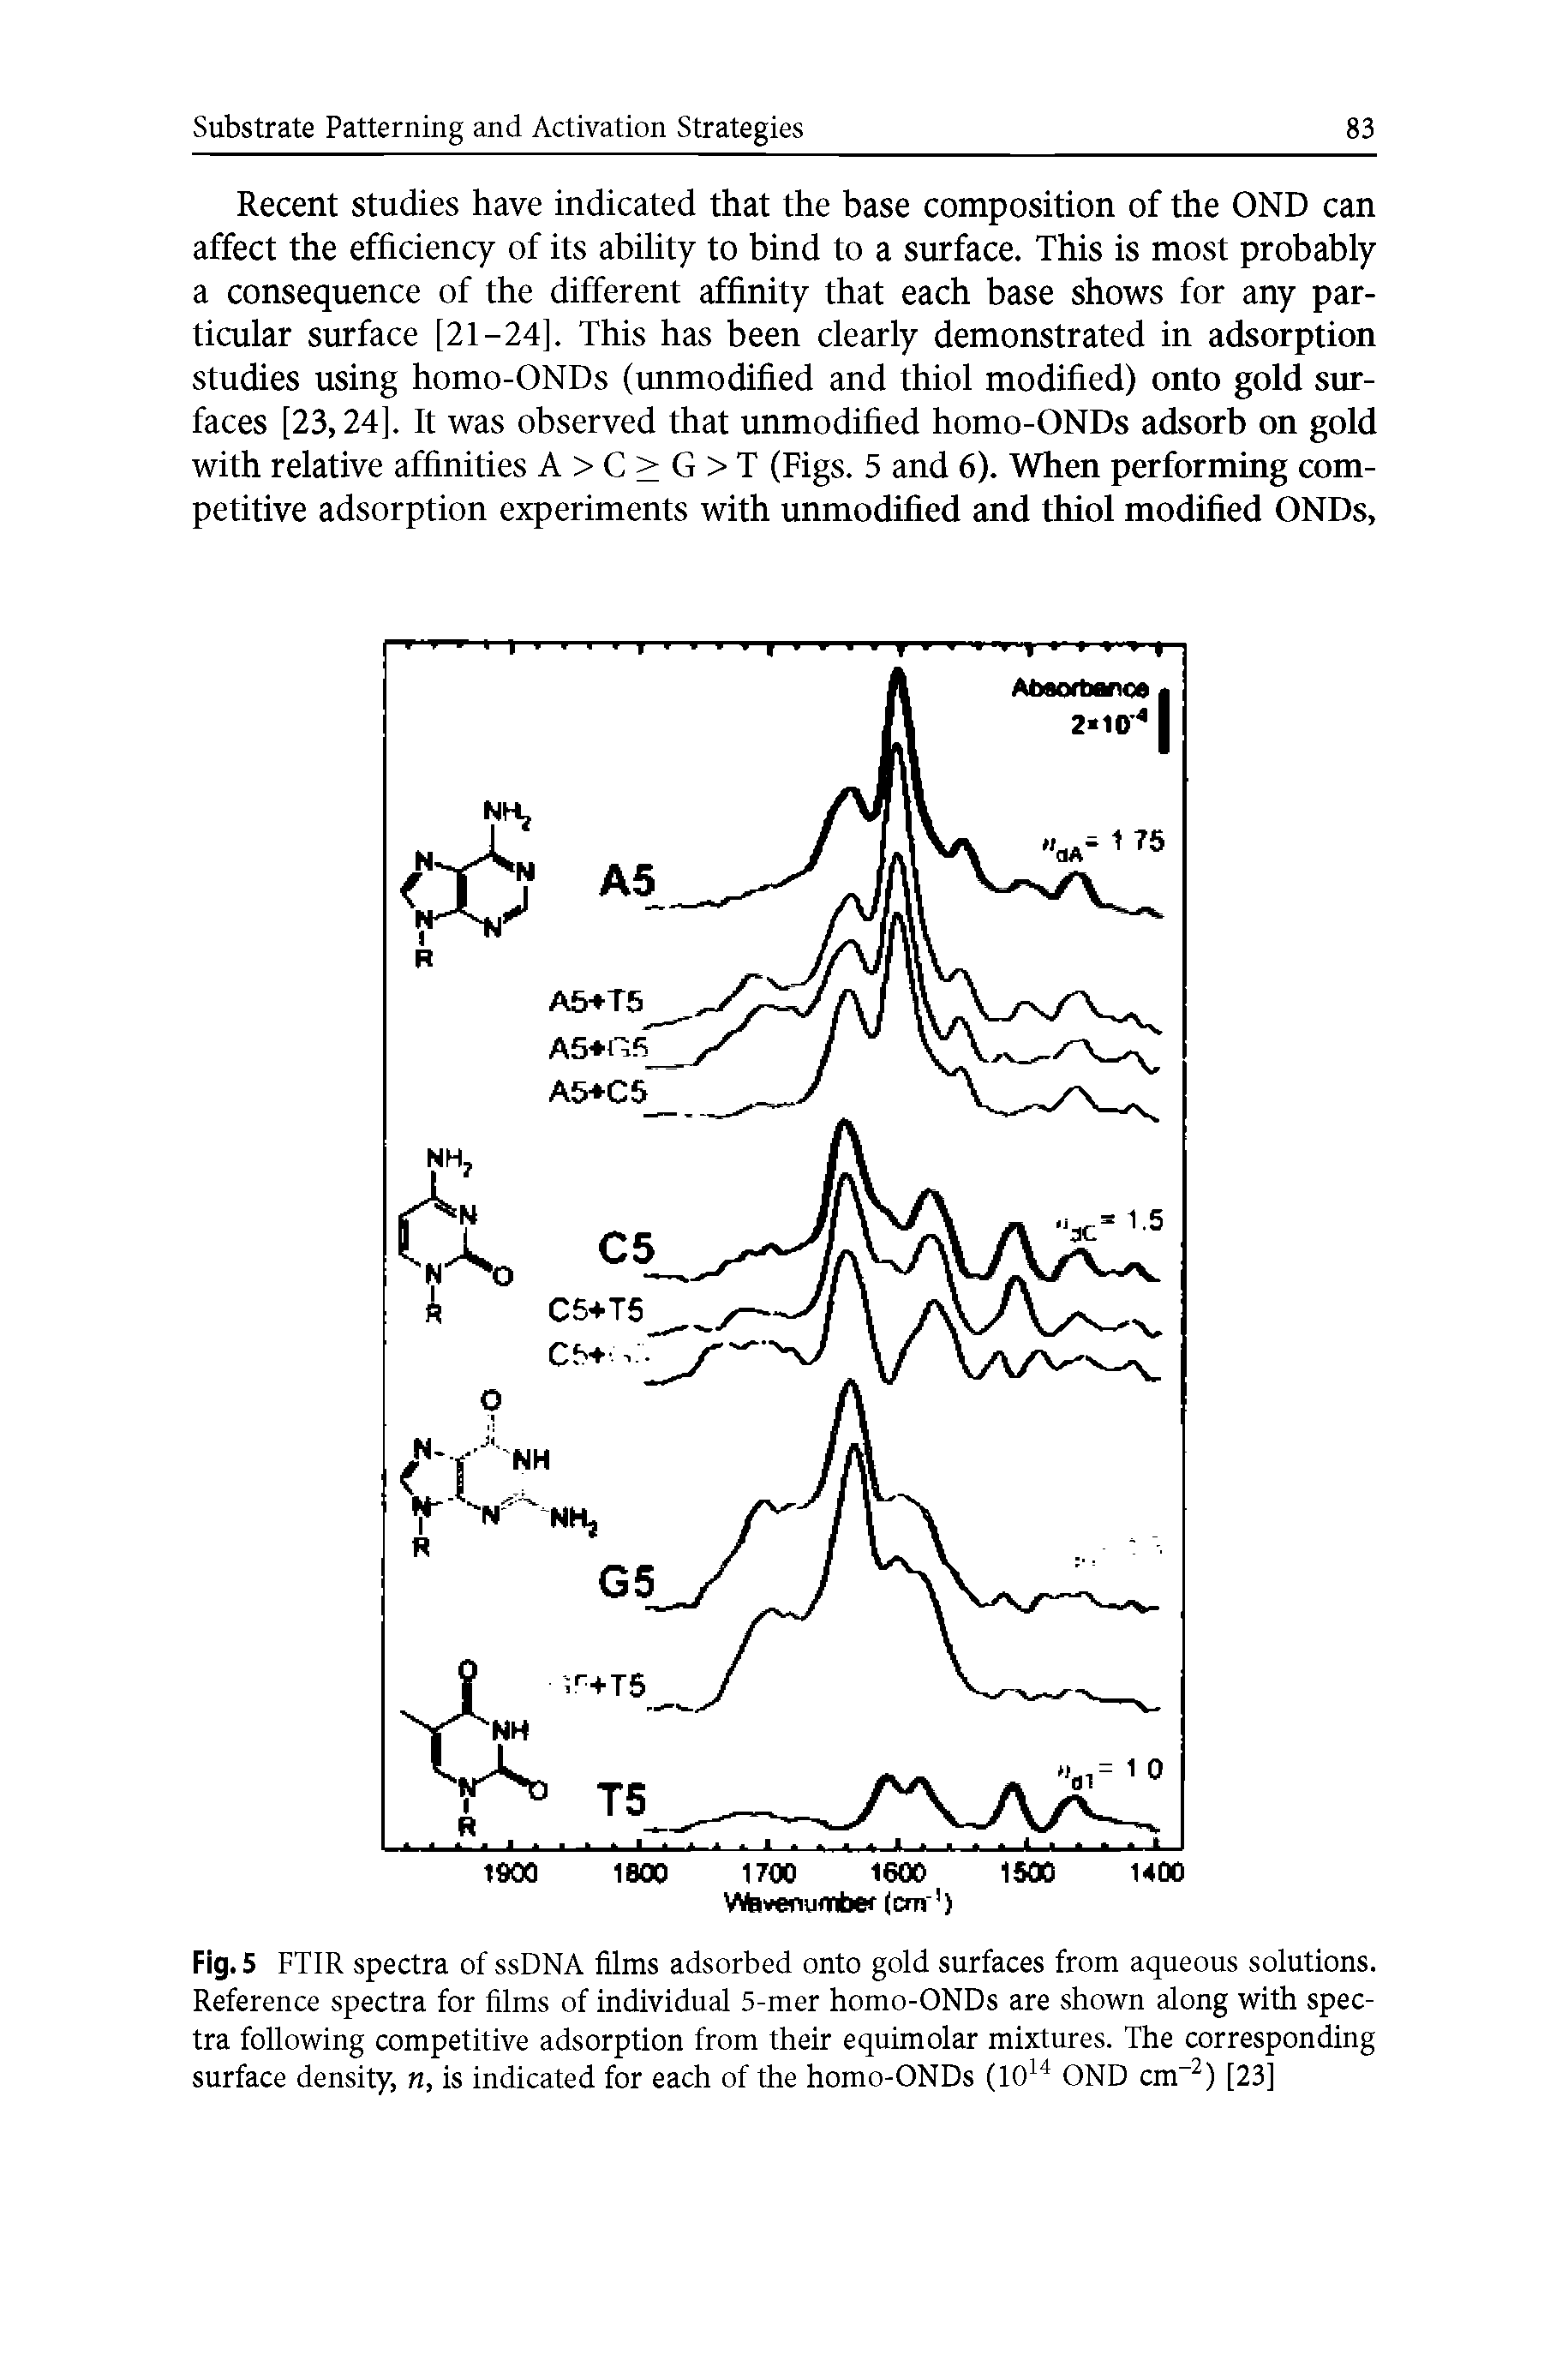 Fig. 5 FTIR spectra of ssDNA films adsorbed onto gold surfaces from aqueous solutions. Reference spectra for films of individual 5-mer homo-ONDs are shown along with spectra following competitive adsorption from their equimolar mixtures. The corresponding surface density, n, is indicated for each of the homo-ONDs (lO OND cm ) [23]...